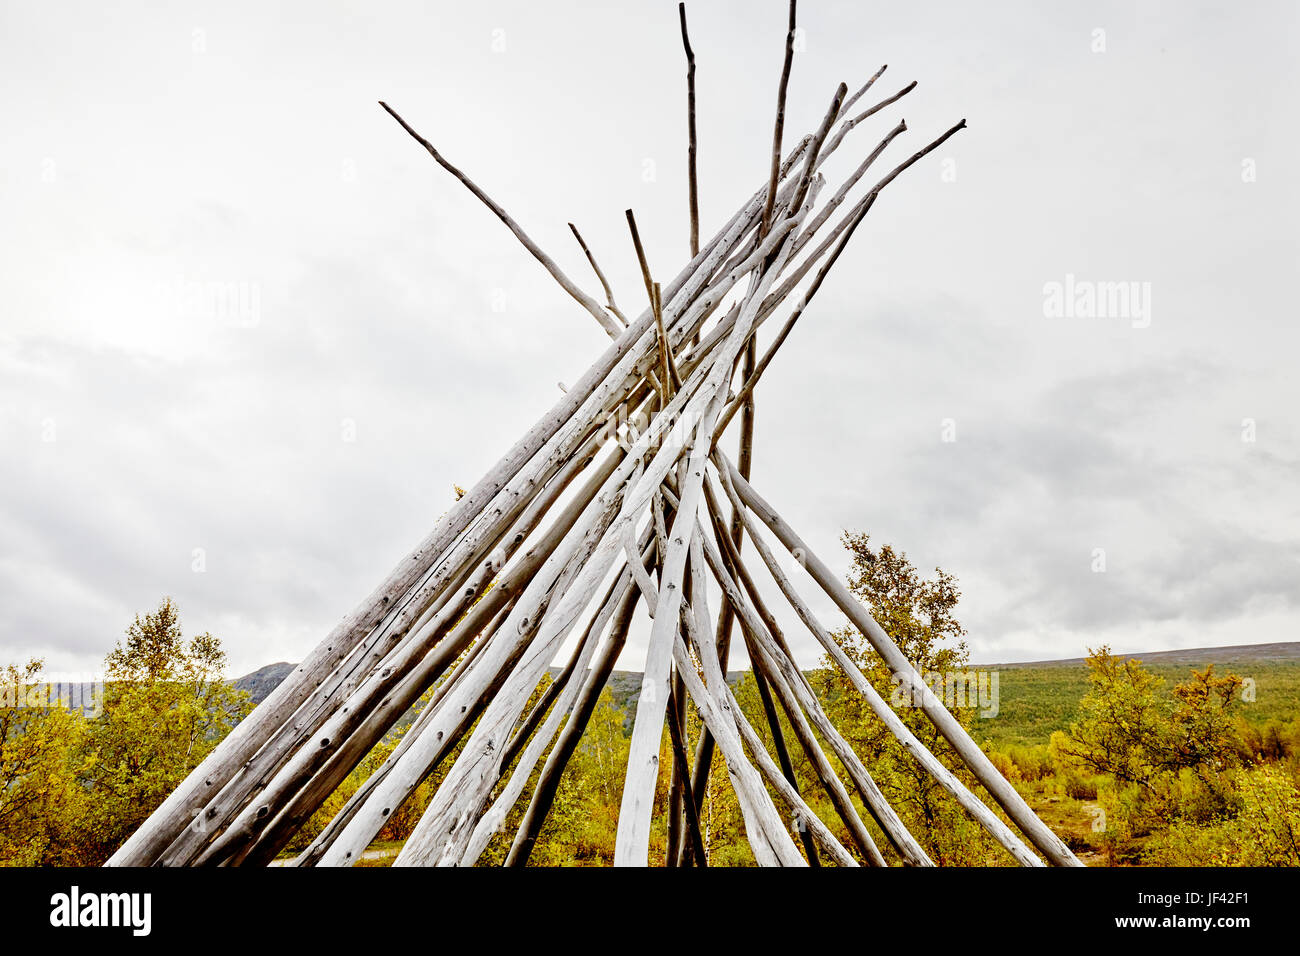 Teepee-shaped log structure Stock Photo